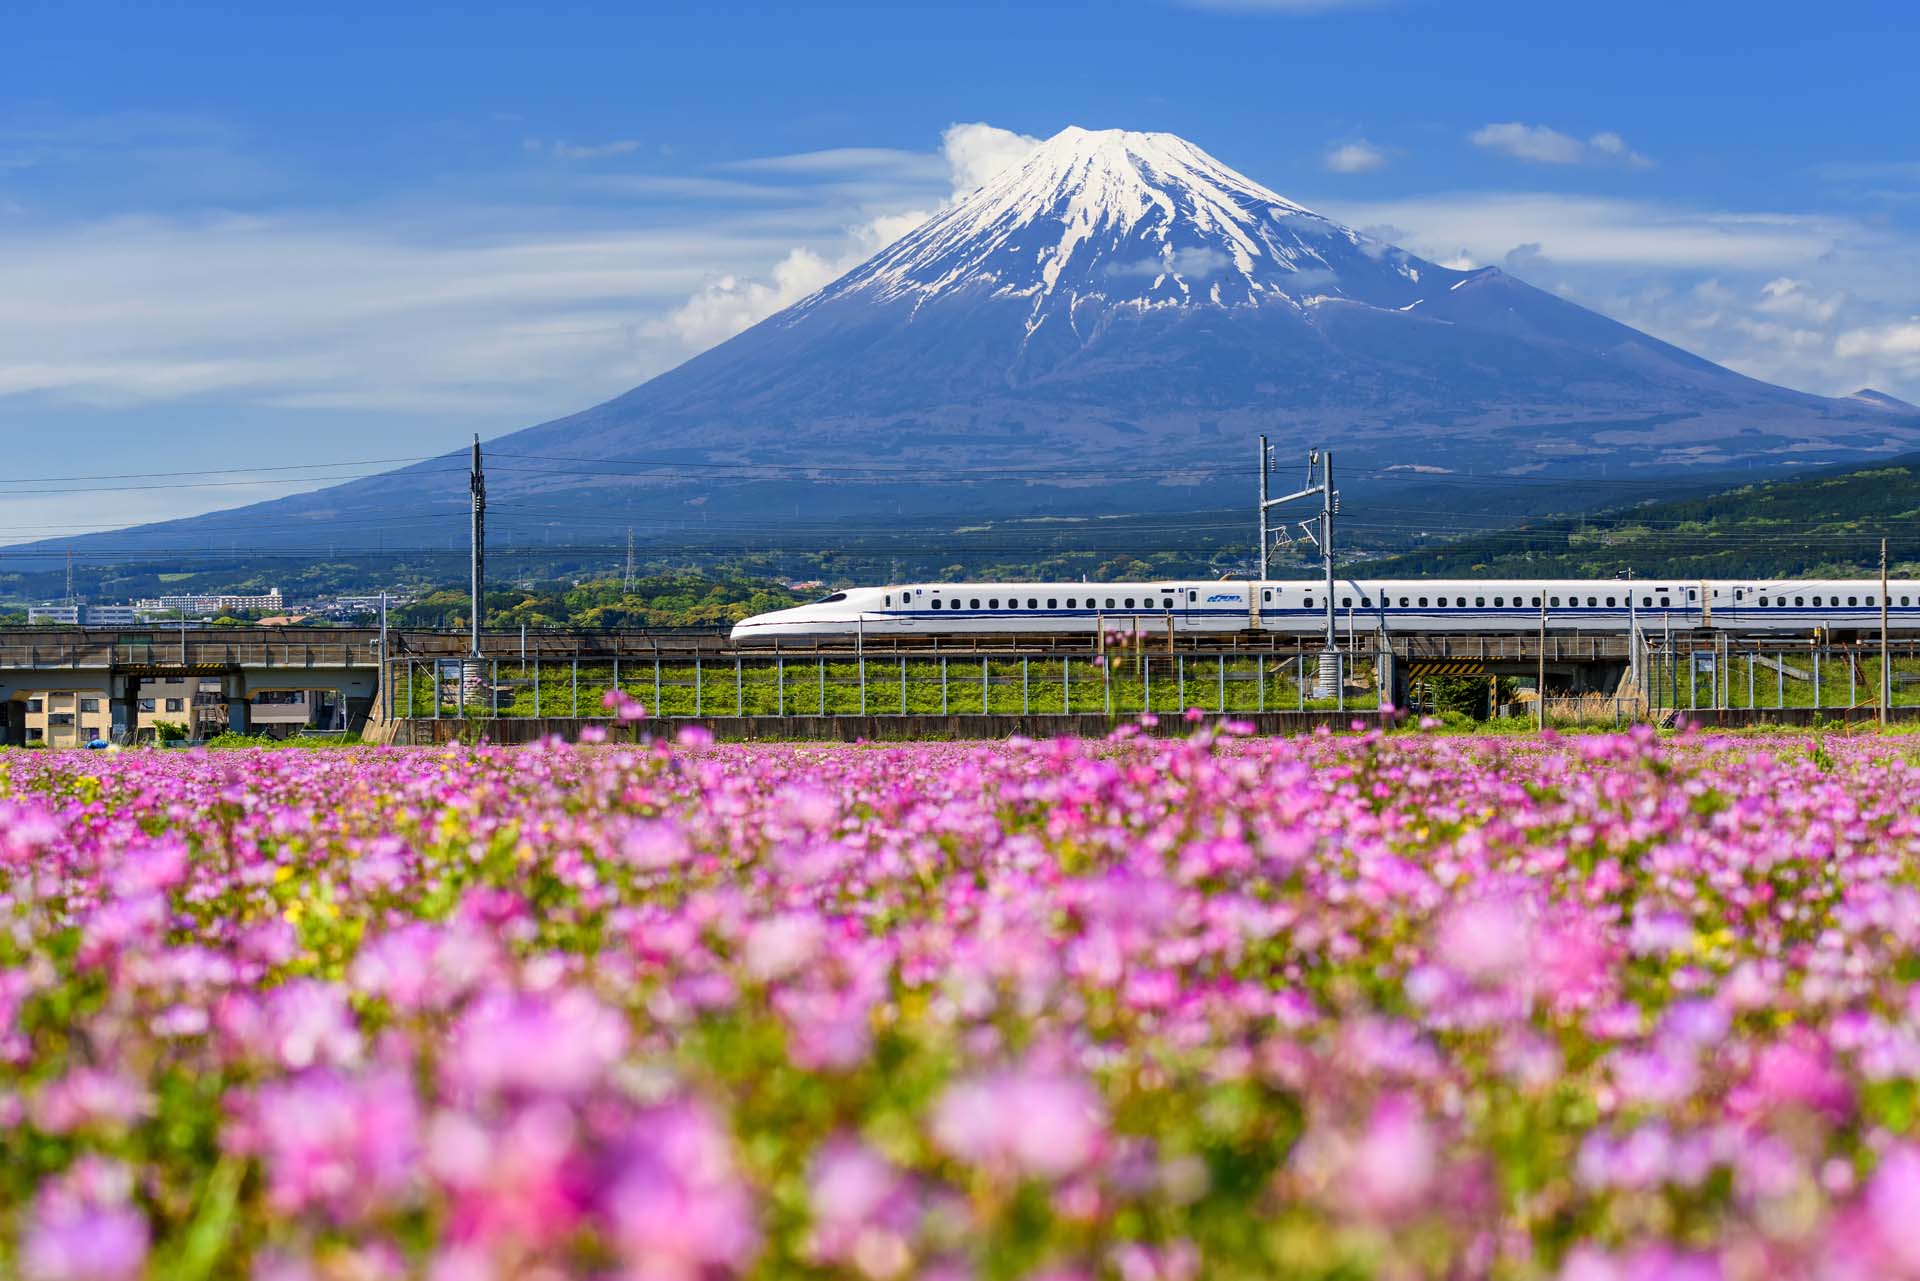 A bullet train in Japan going past a field filled with pink flowers with Mt Fuji in the background and a blue sky